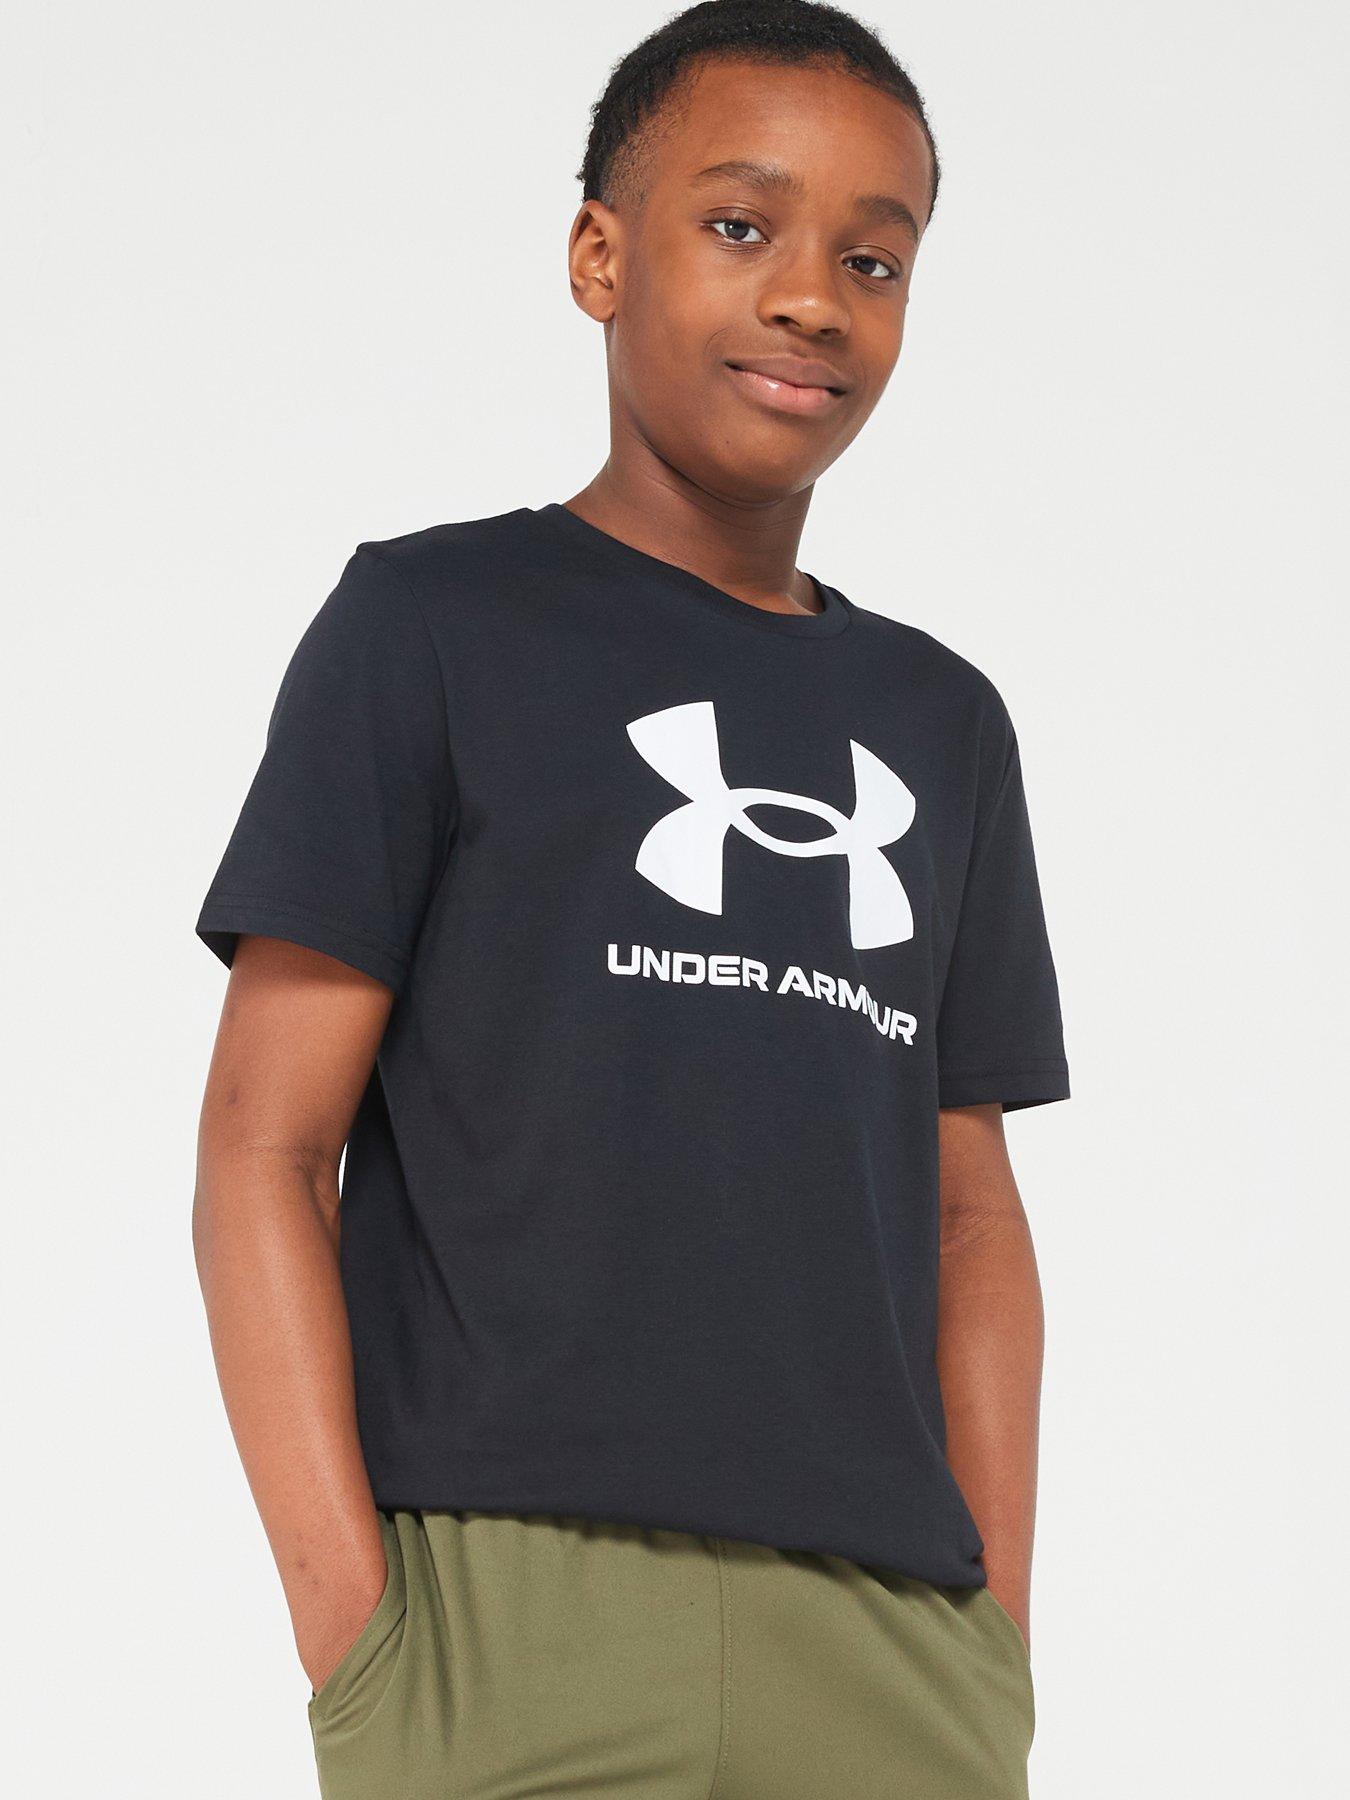 Under armour, Boys clothes, Child & baby